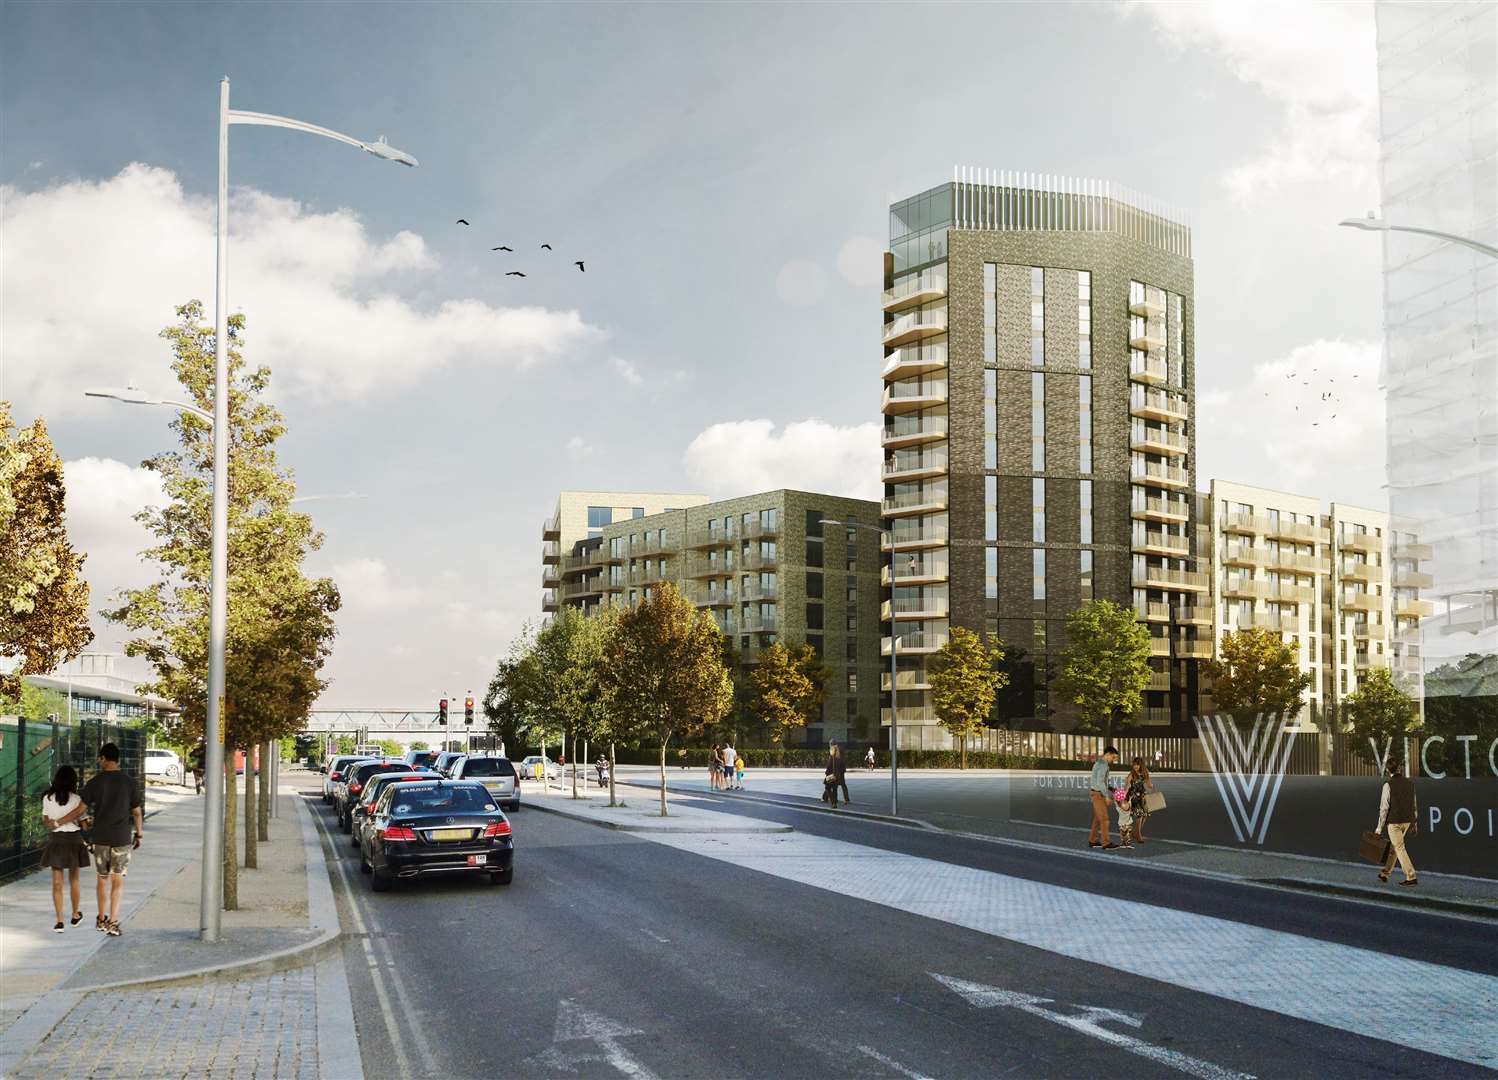 The tower block will go over 16 storeys - this view shows it from Victoria Road. Picture: Blur Studio Ltd